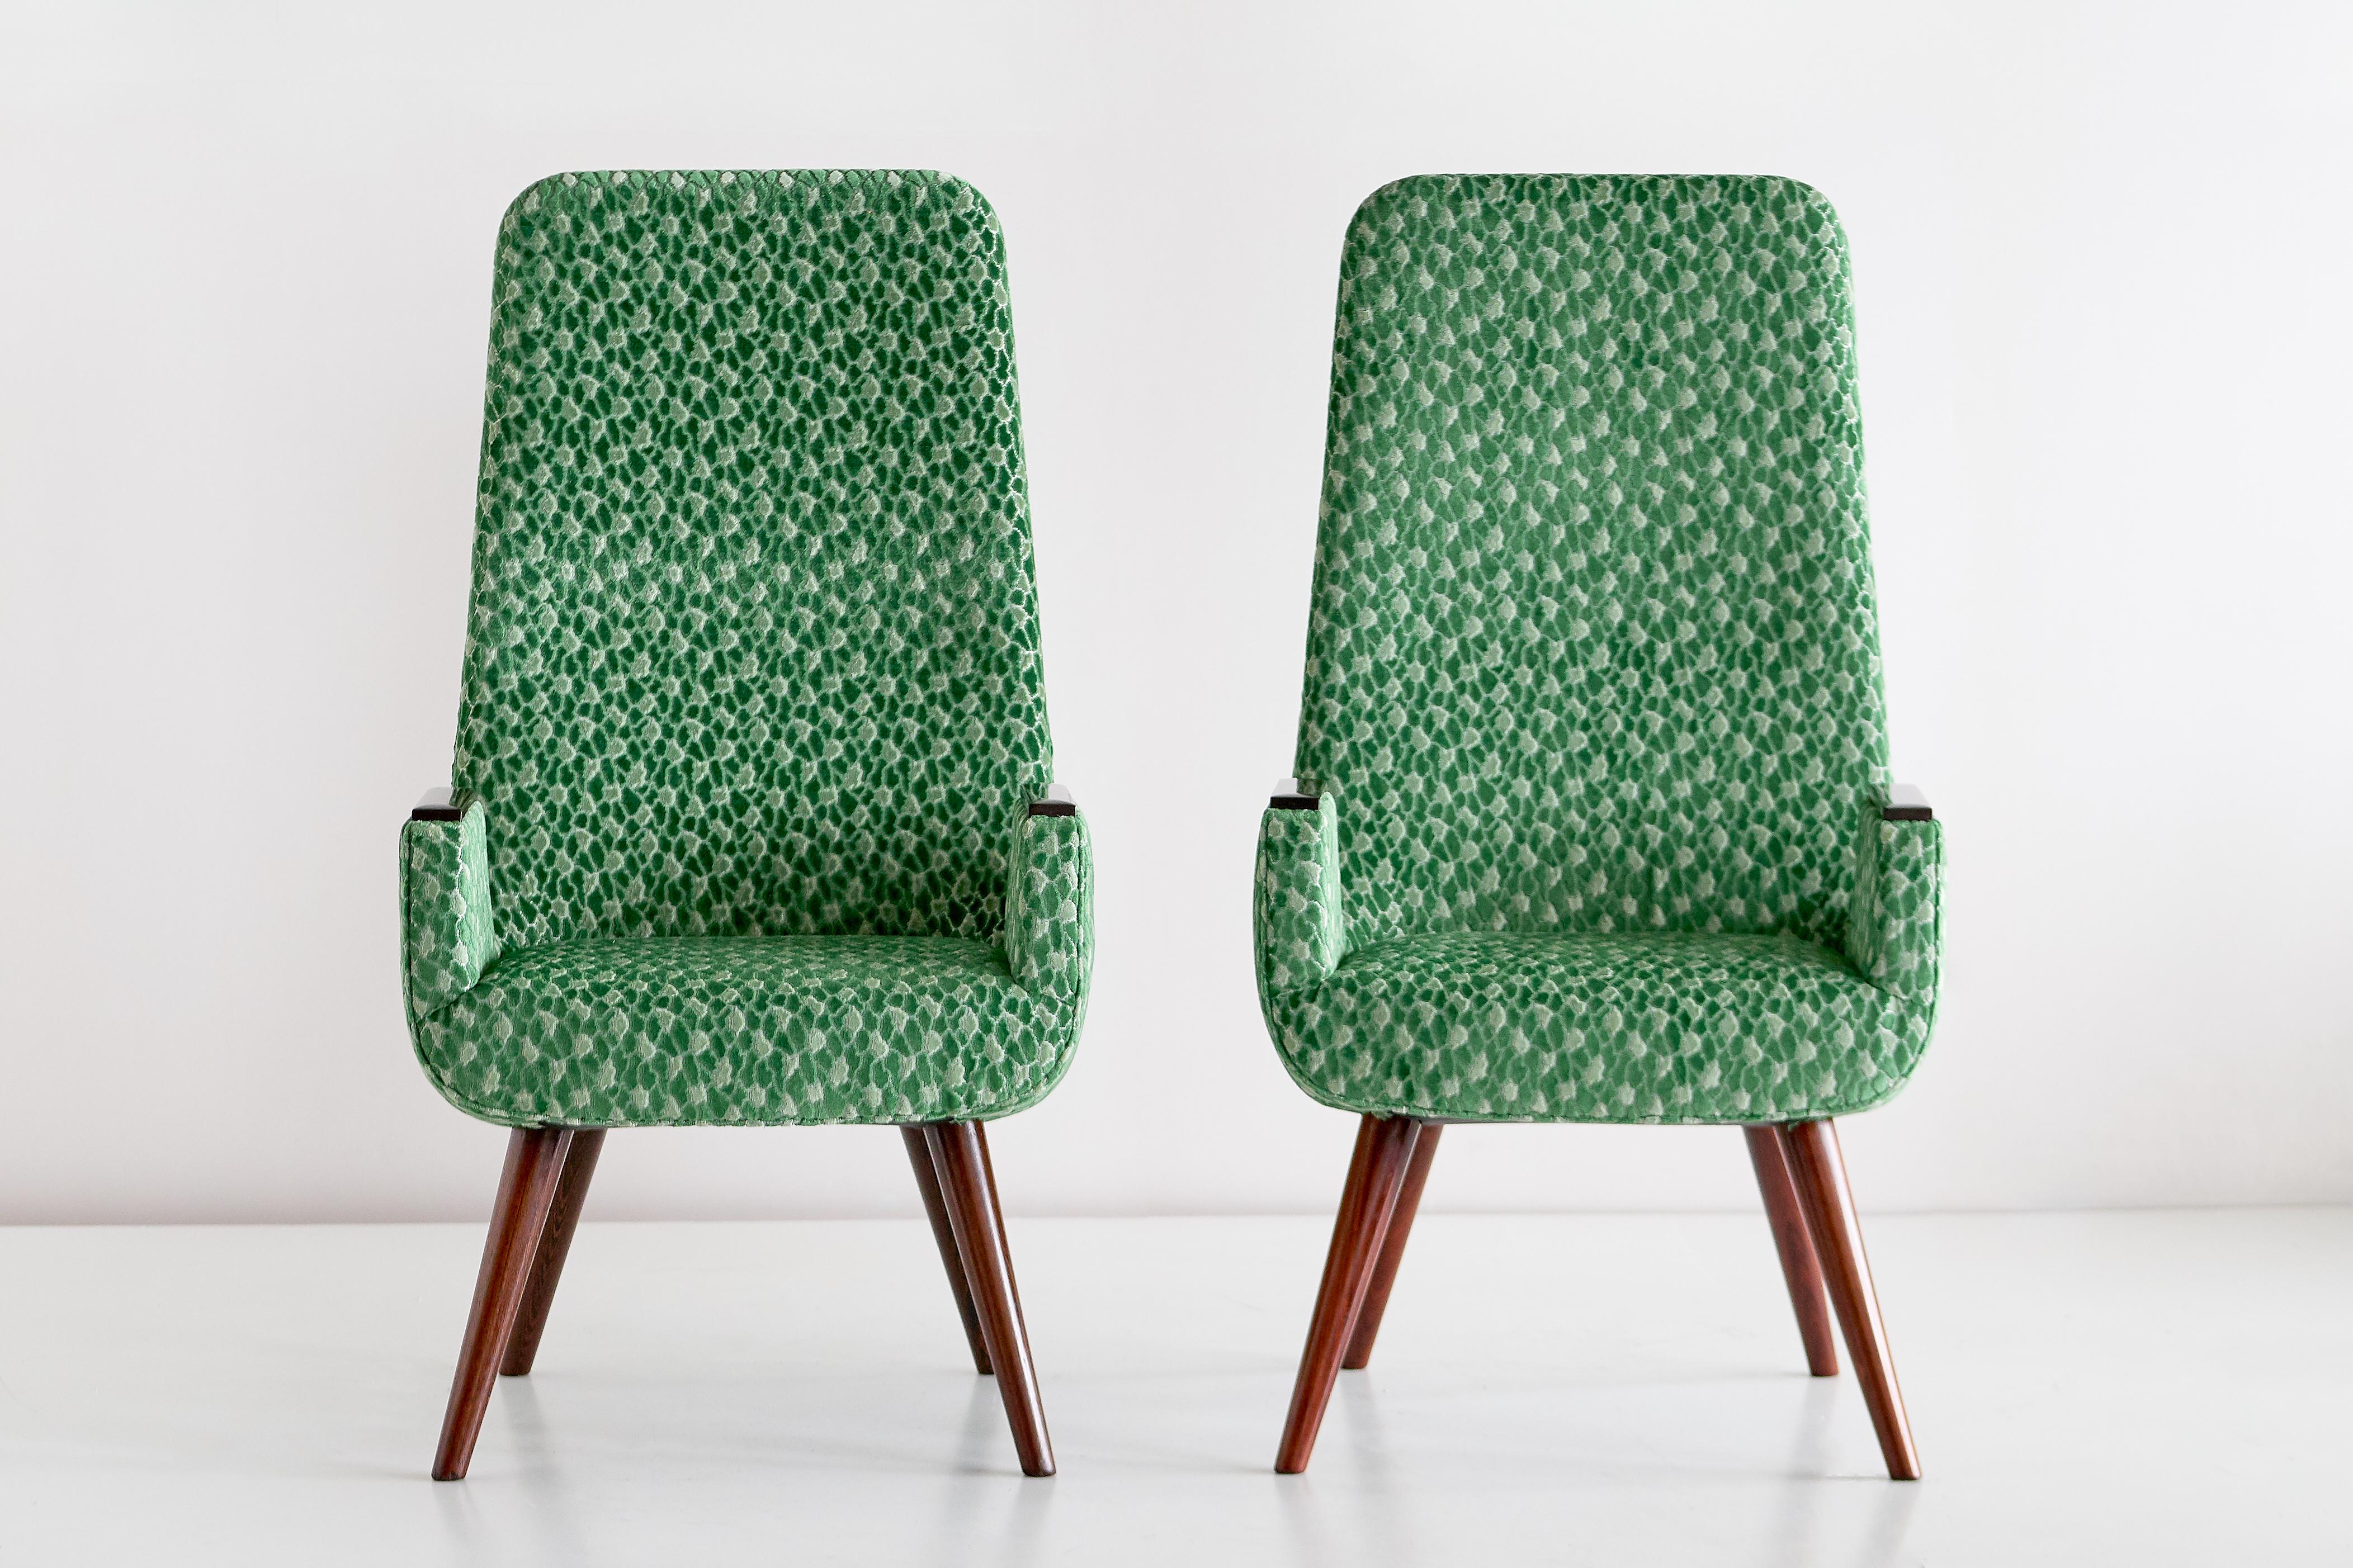 Pair of High Back Armchairs in Green Braquenié Velvet and Wengé Wood, 1950s For Sale 4